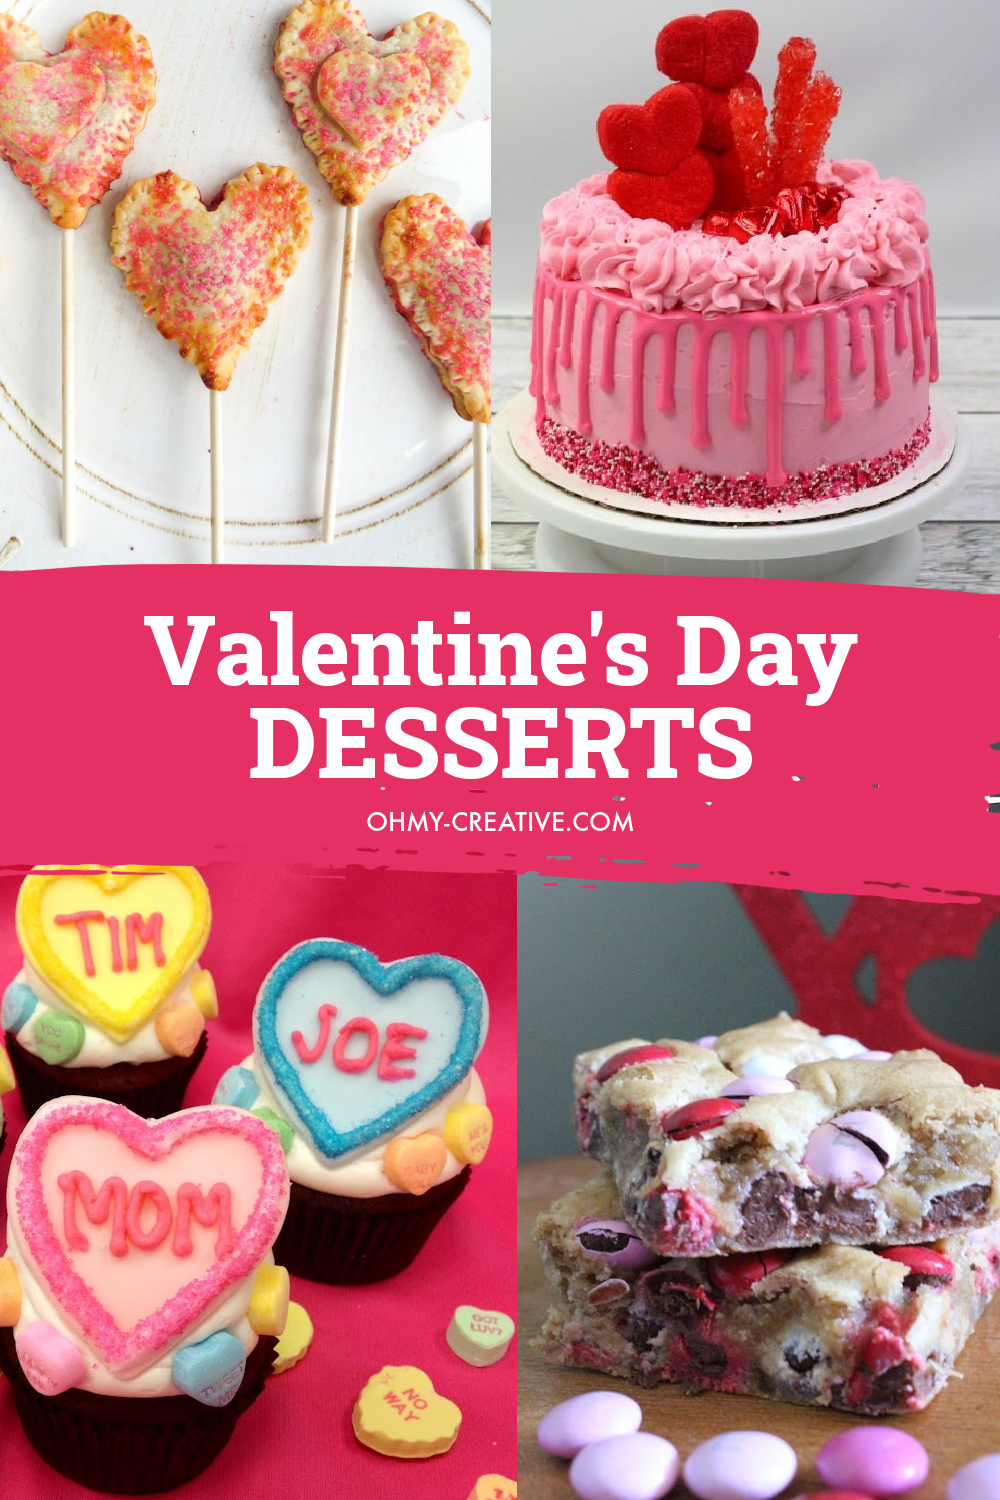 A collage of Valentine's Day desserts including cookies, cakes and heart shaped cherry pie pops!.